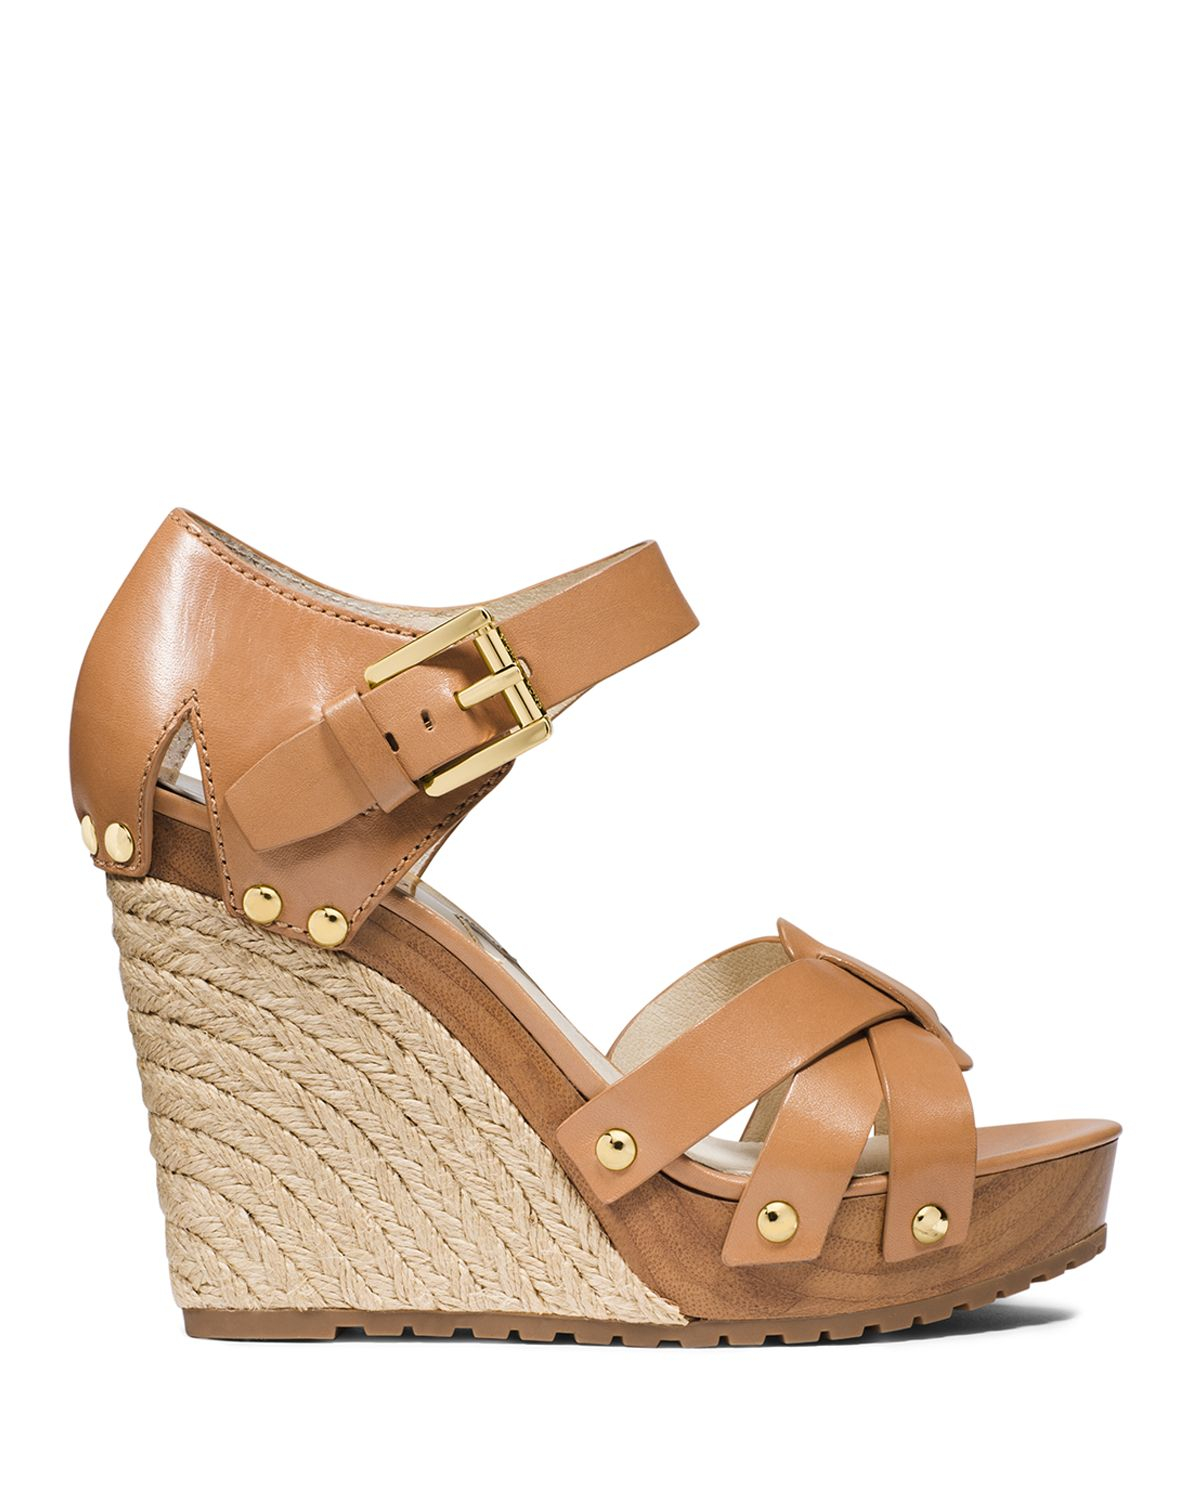 Michael Michael Kors Wedge Sandals - Somerly in Brown (Tan) | Lyst